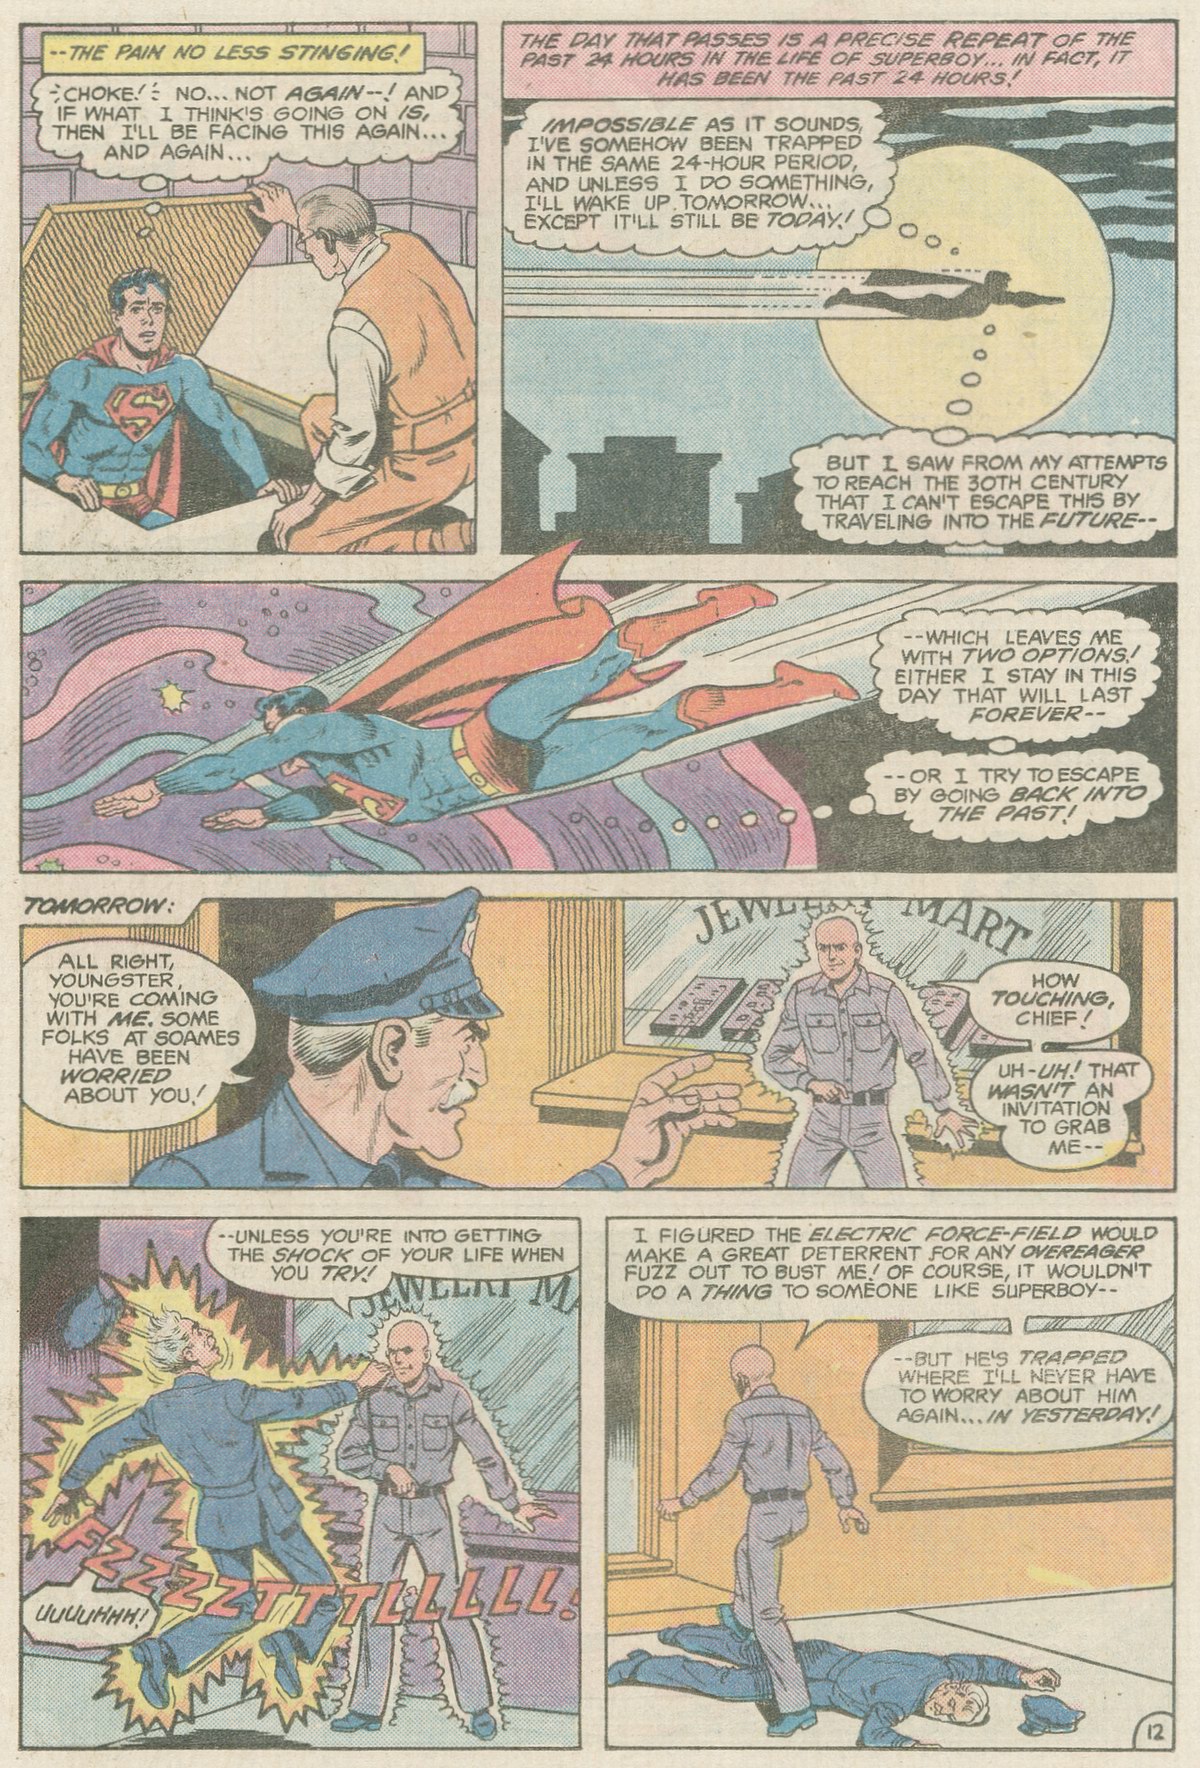 The New Adventures of Superboy 38 Page 12